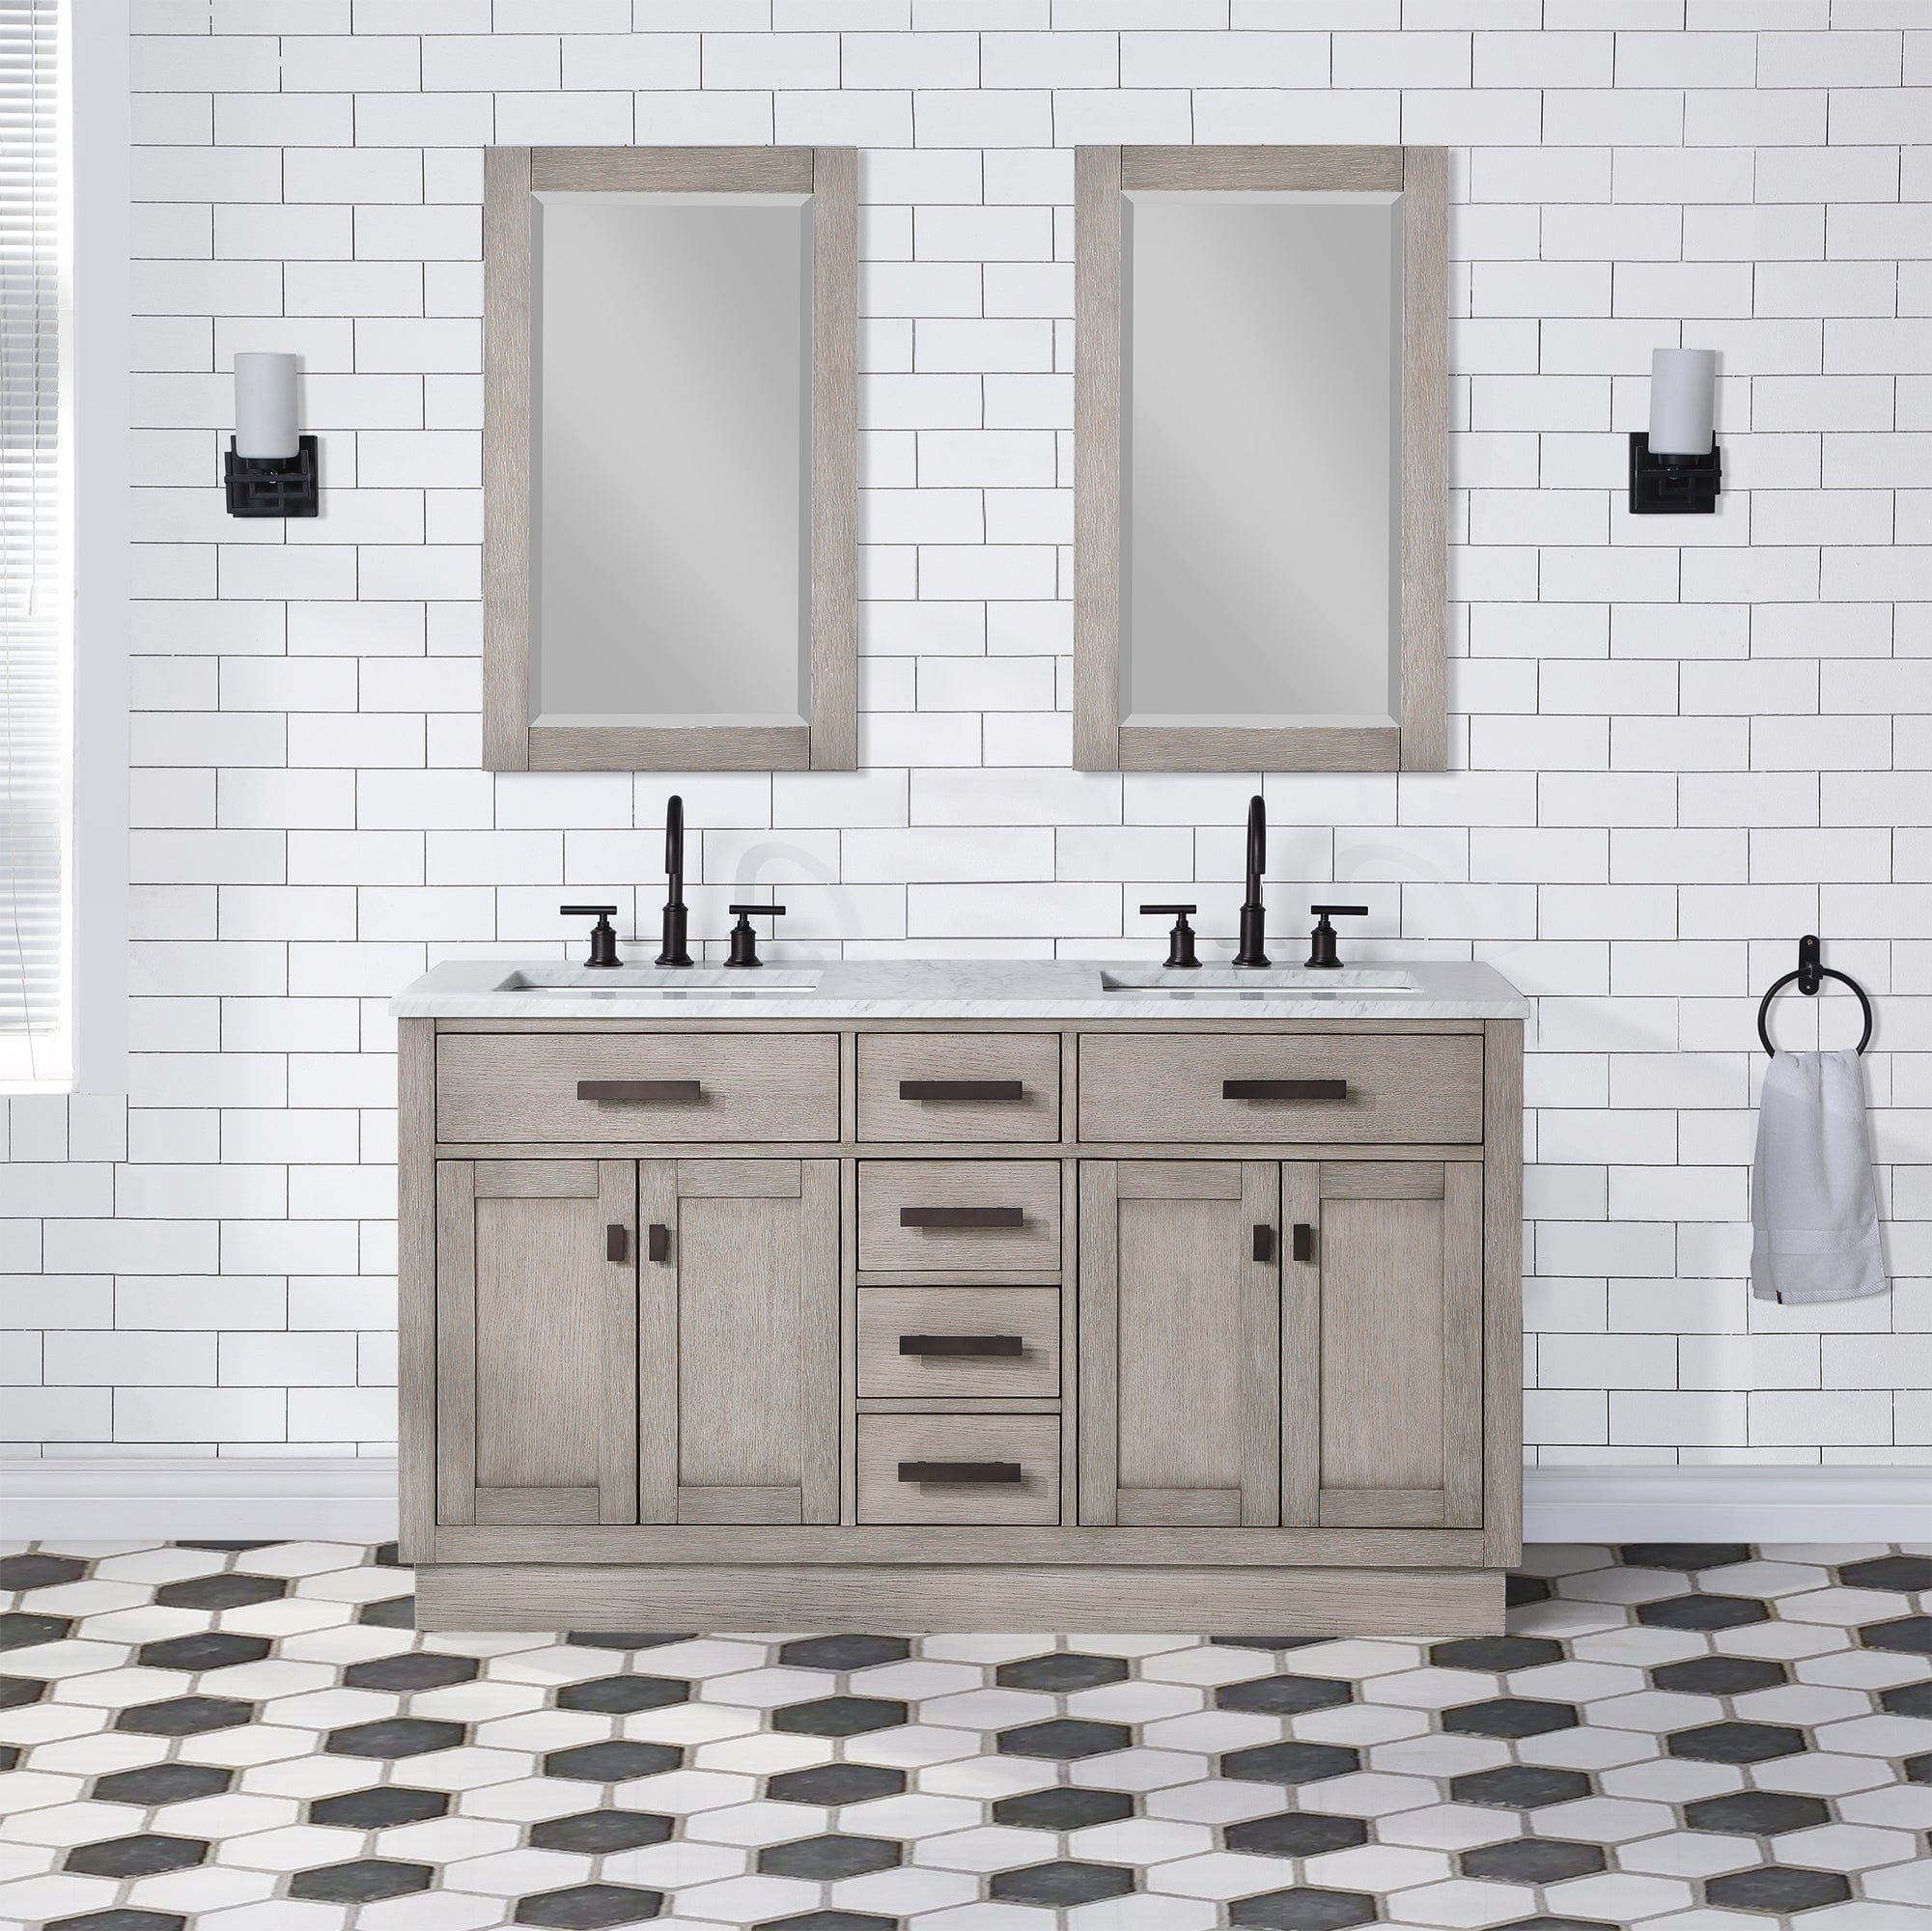 Chestnut 60 In. Double Sink Carrara White Marble Countertop Vanity In Grey Oak with Mirrors - Molaix732030764798CH60CW03GK-R21000000